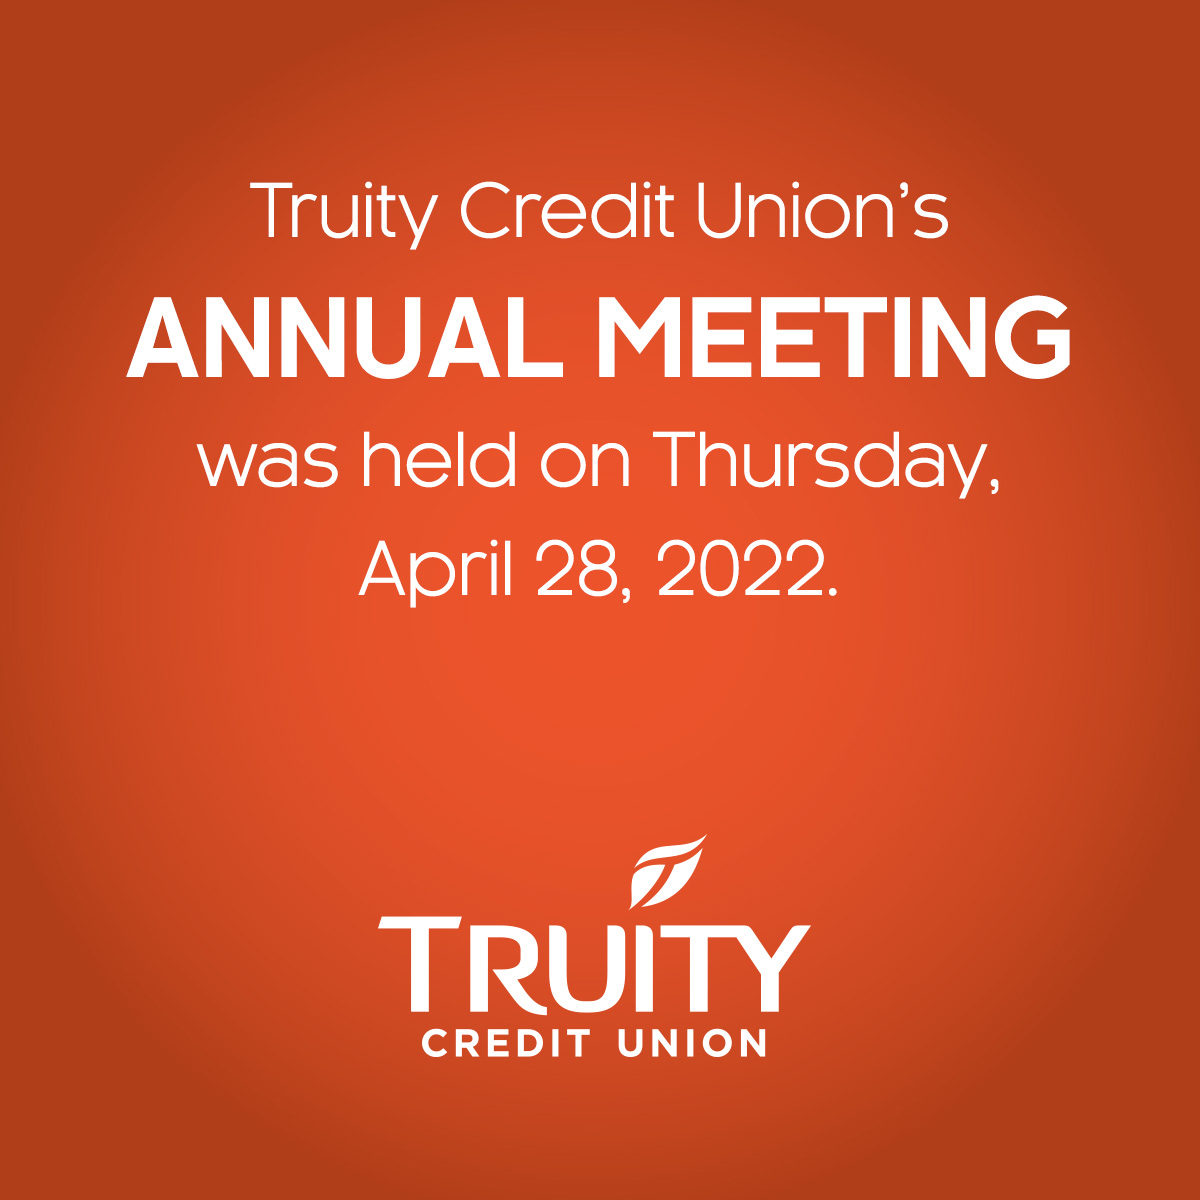 Truity Credit Union Held Its 83rd Annual Meeting